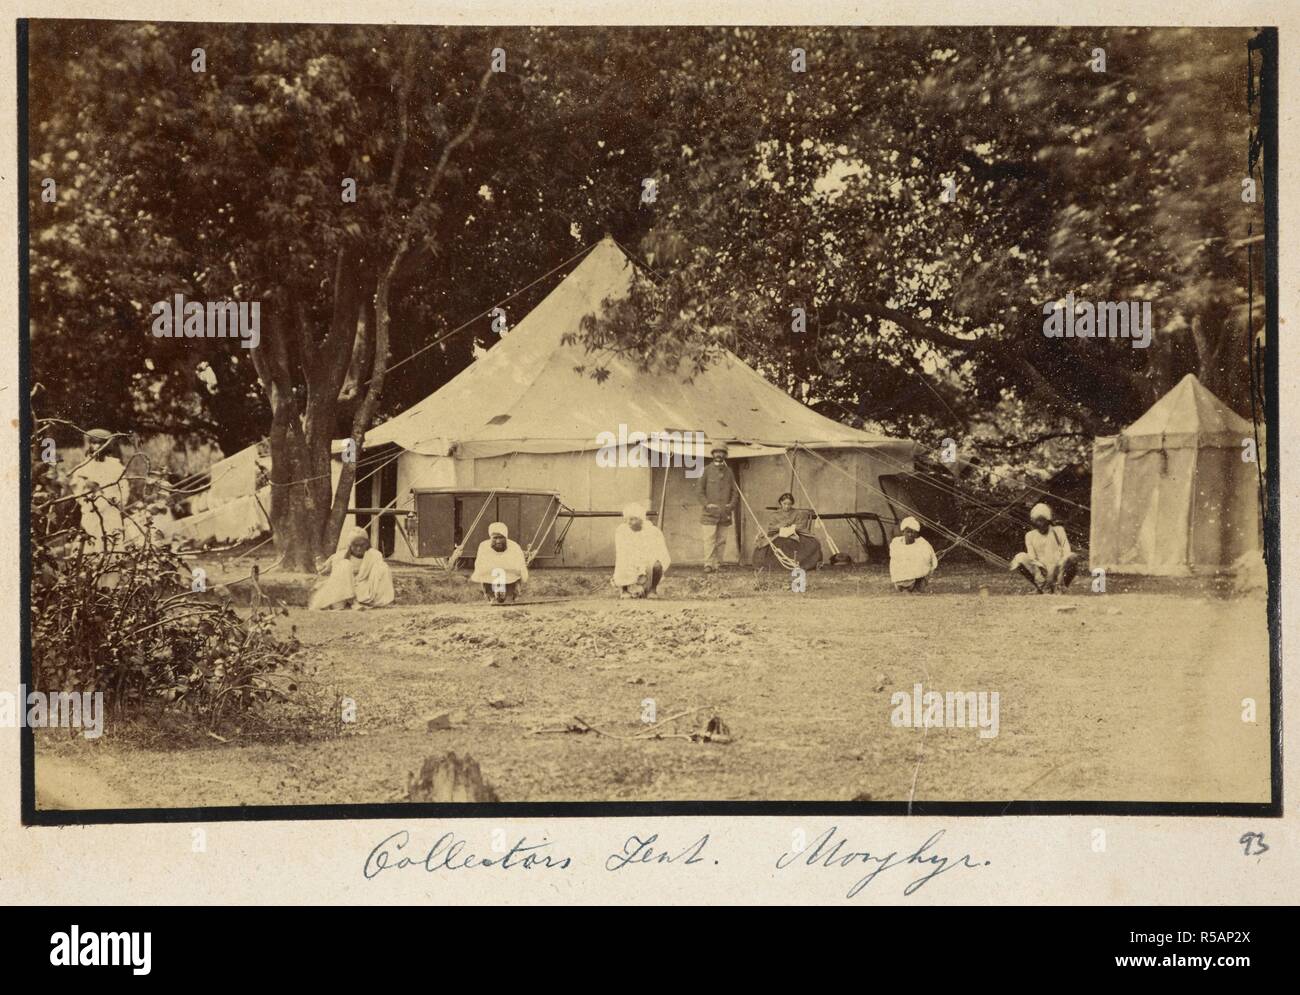 Collector's Tent, Monghyr. (Winship Collection). 1860s. Photograph. Source: Photo 798/(93). Language: English. Author: UNKNOWN. Stock Photo